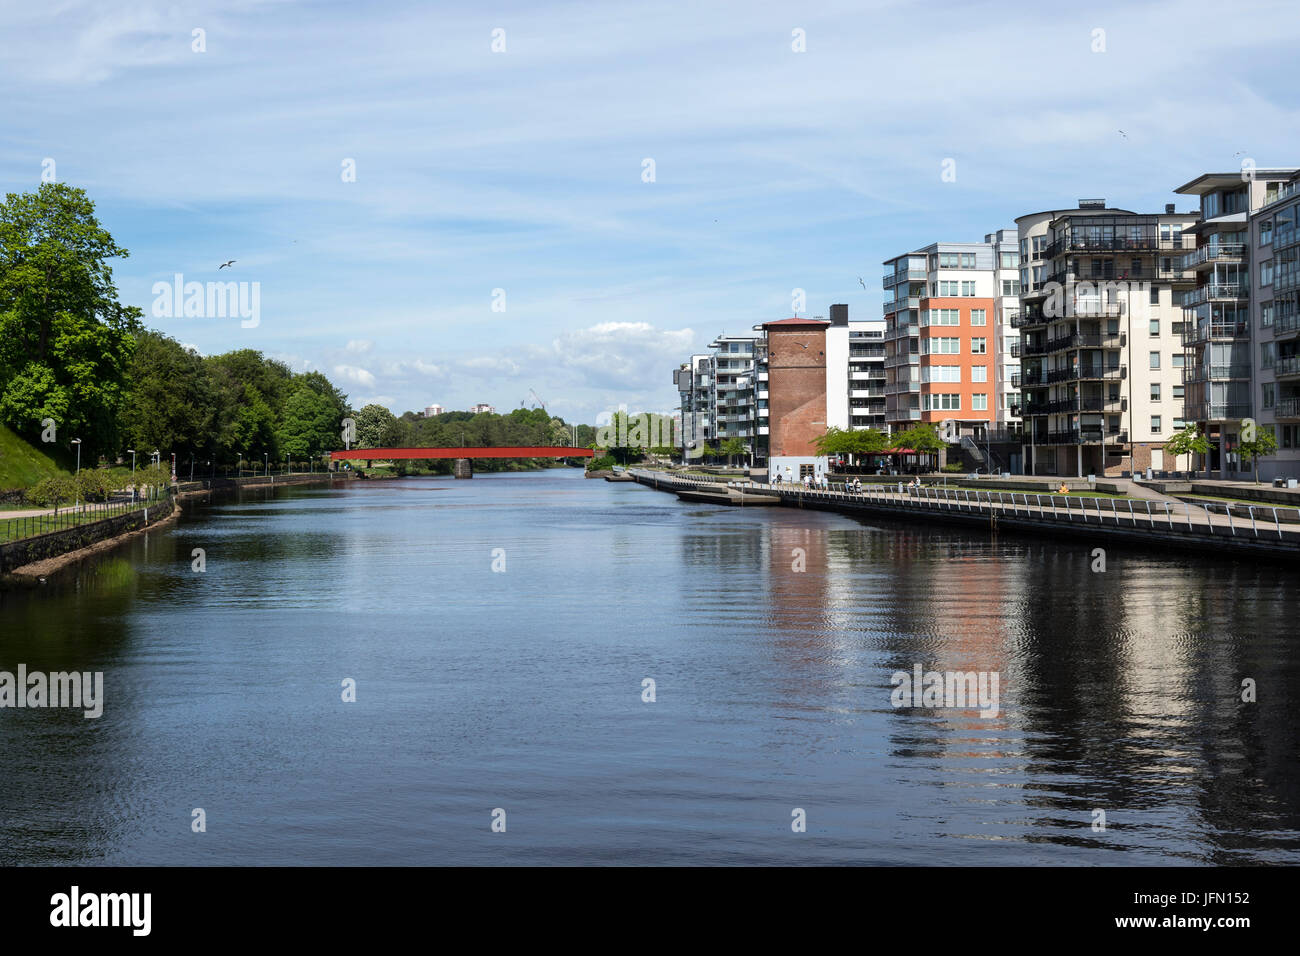 Nissastrand residential complex with condos and apartments by the river Nissan Stock Photo